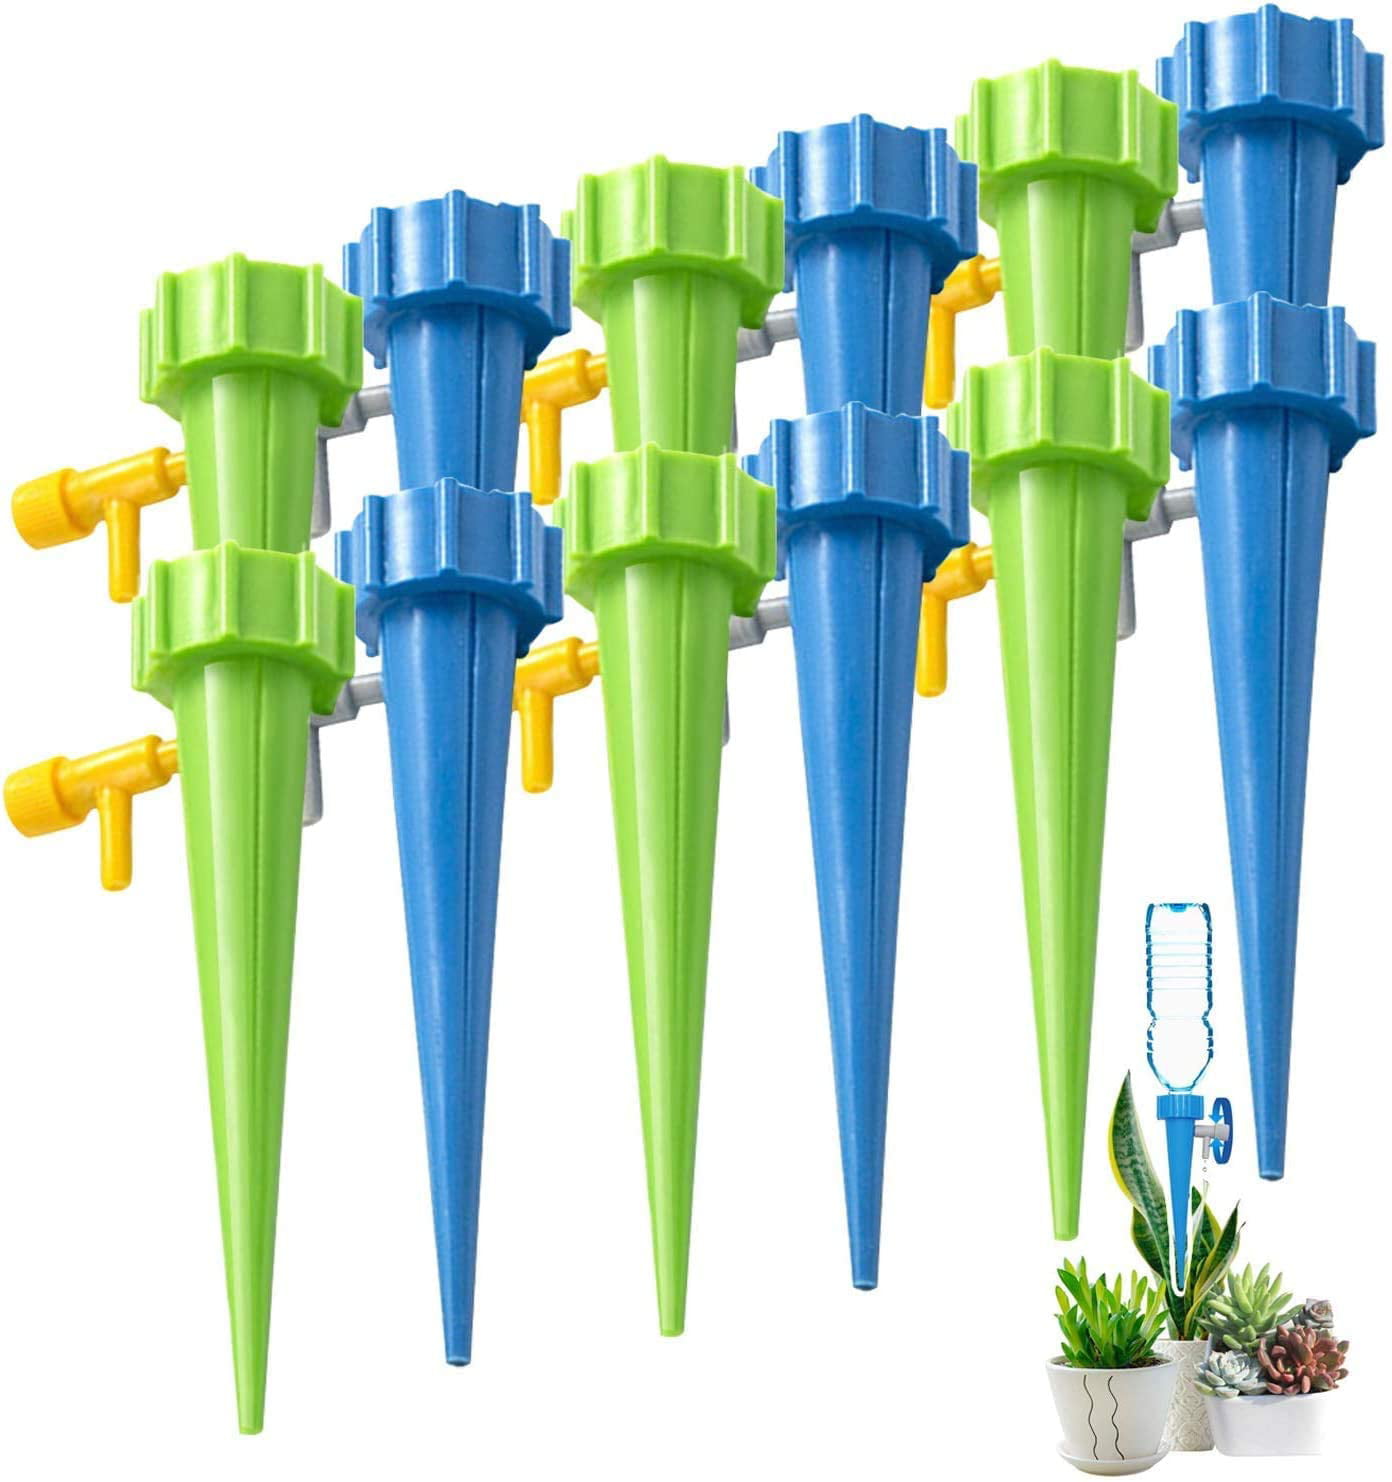 Petyoung 12 PCS Self Watering Spikes Automatic Irrigation Watering Drip Devices with Slow Release Control Valve Switch for Outdoor Indoor Flower or Vegetables 